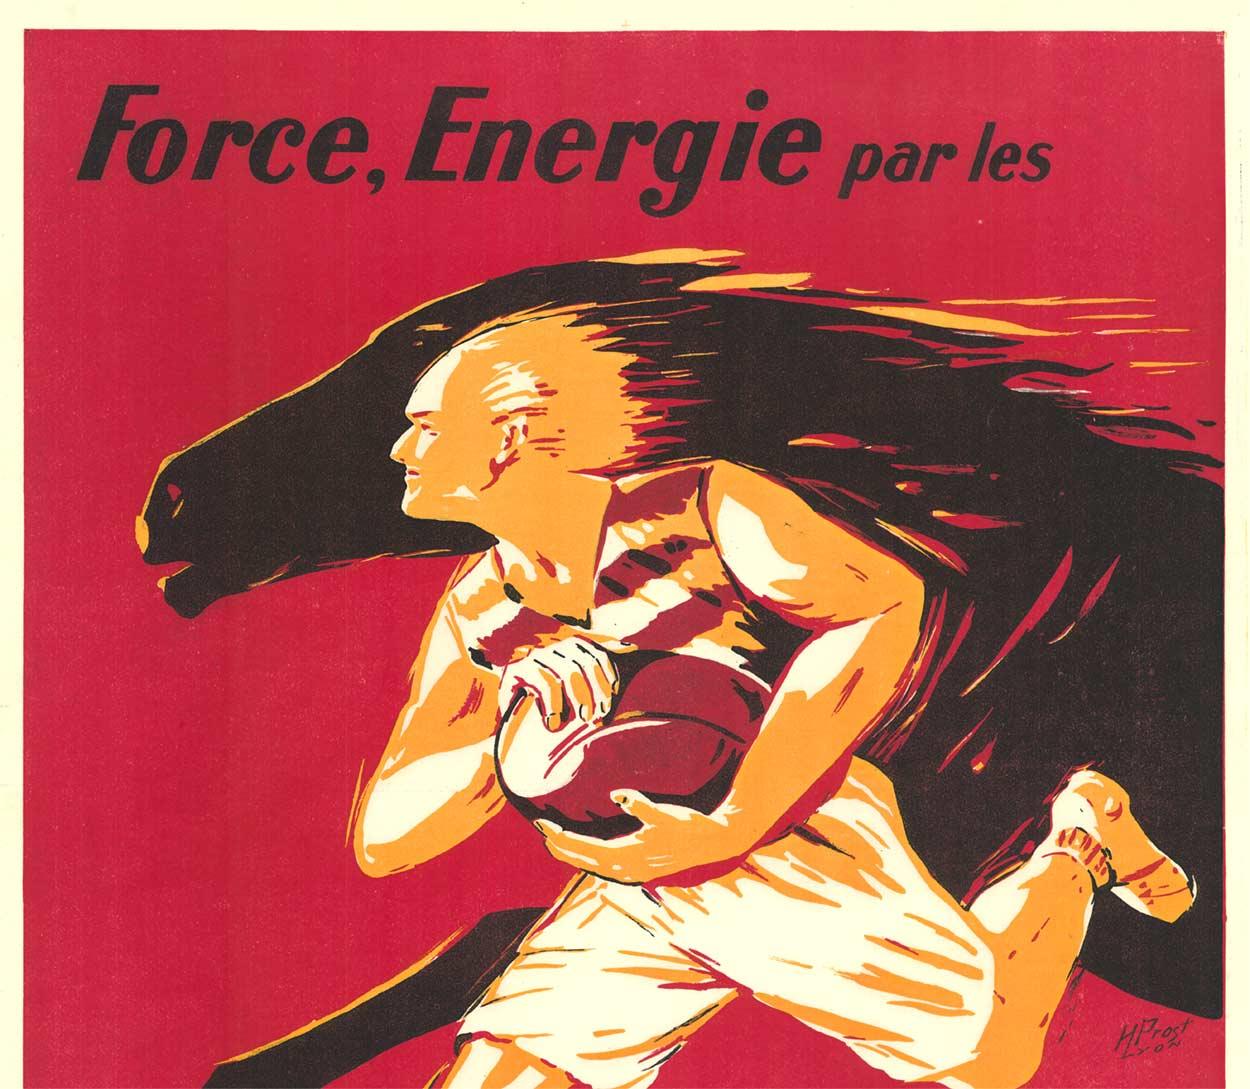 Original 'Produits Lavocat' vintage poster for Force and Energy - Print by H. Prost